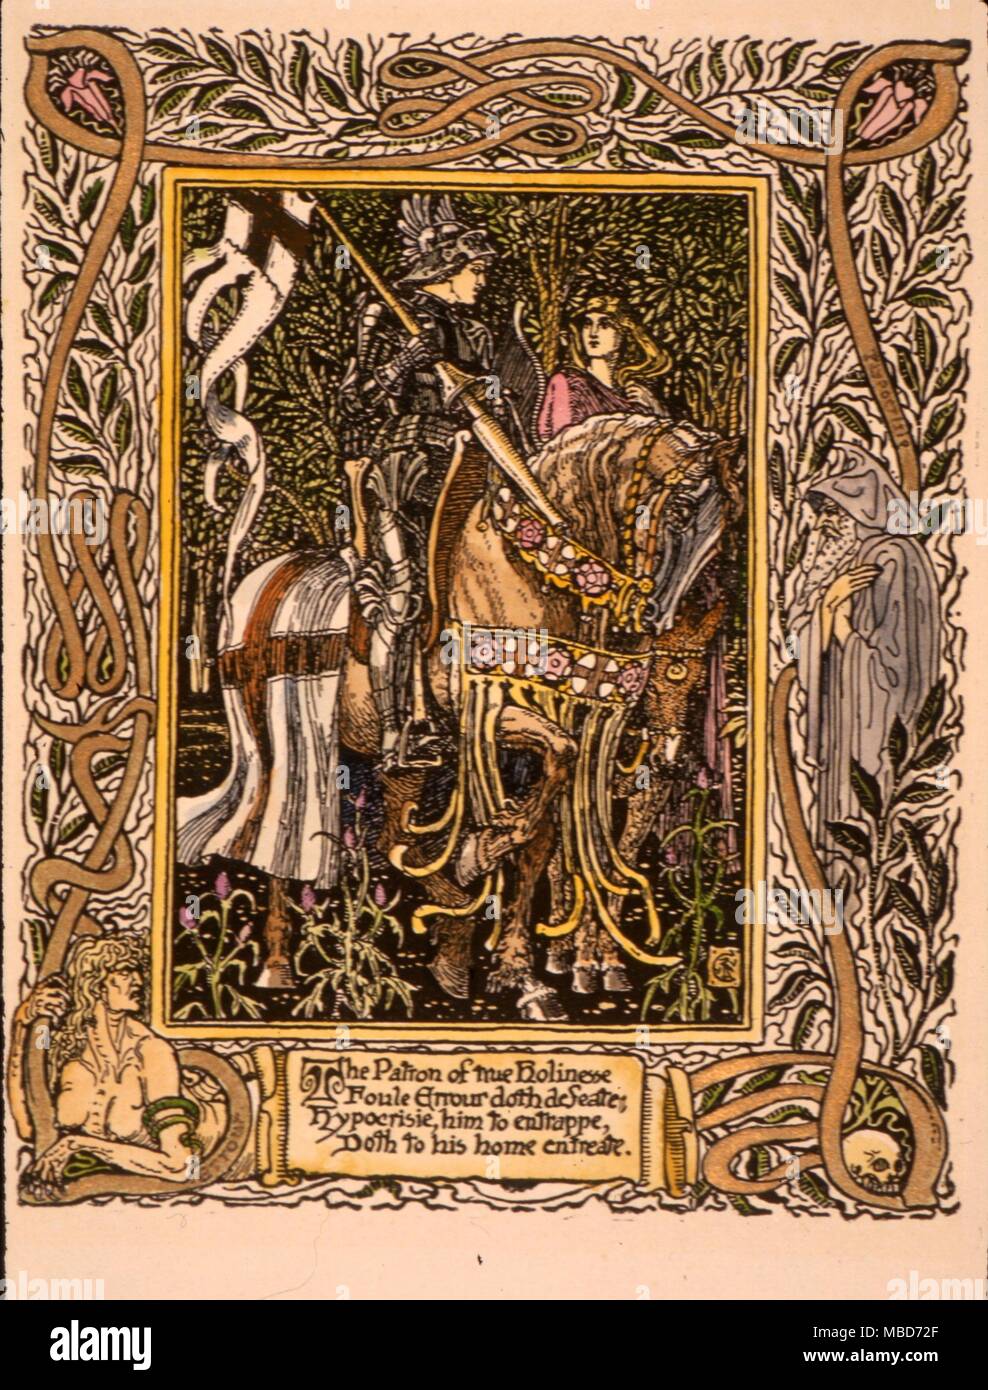 Faerie Queene - illustrtion by Walter Crane for the 1st book of The Faerie Queene, circa 1898 - The Patron of true Holiness... Stock Photo